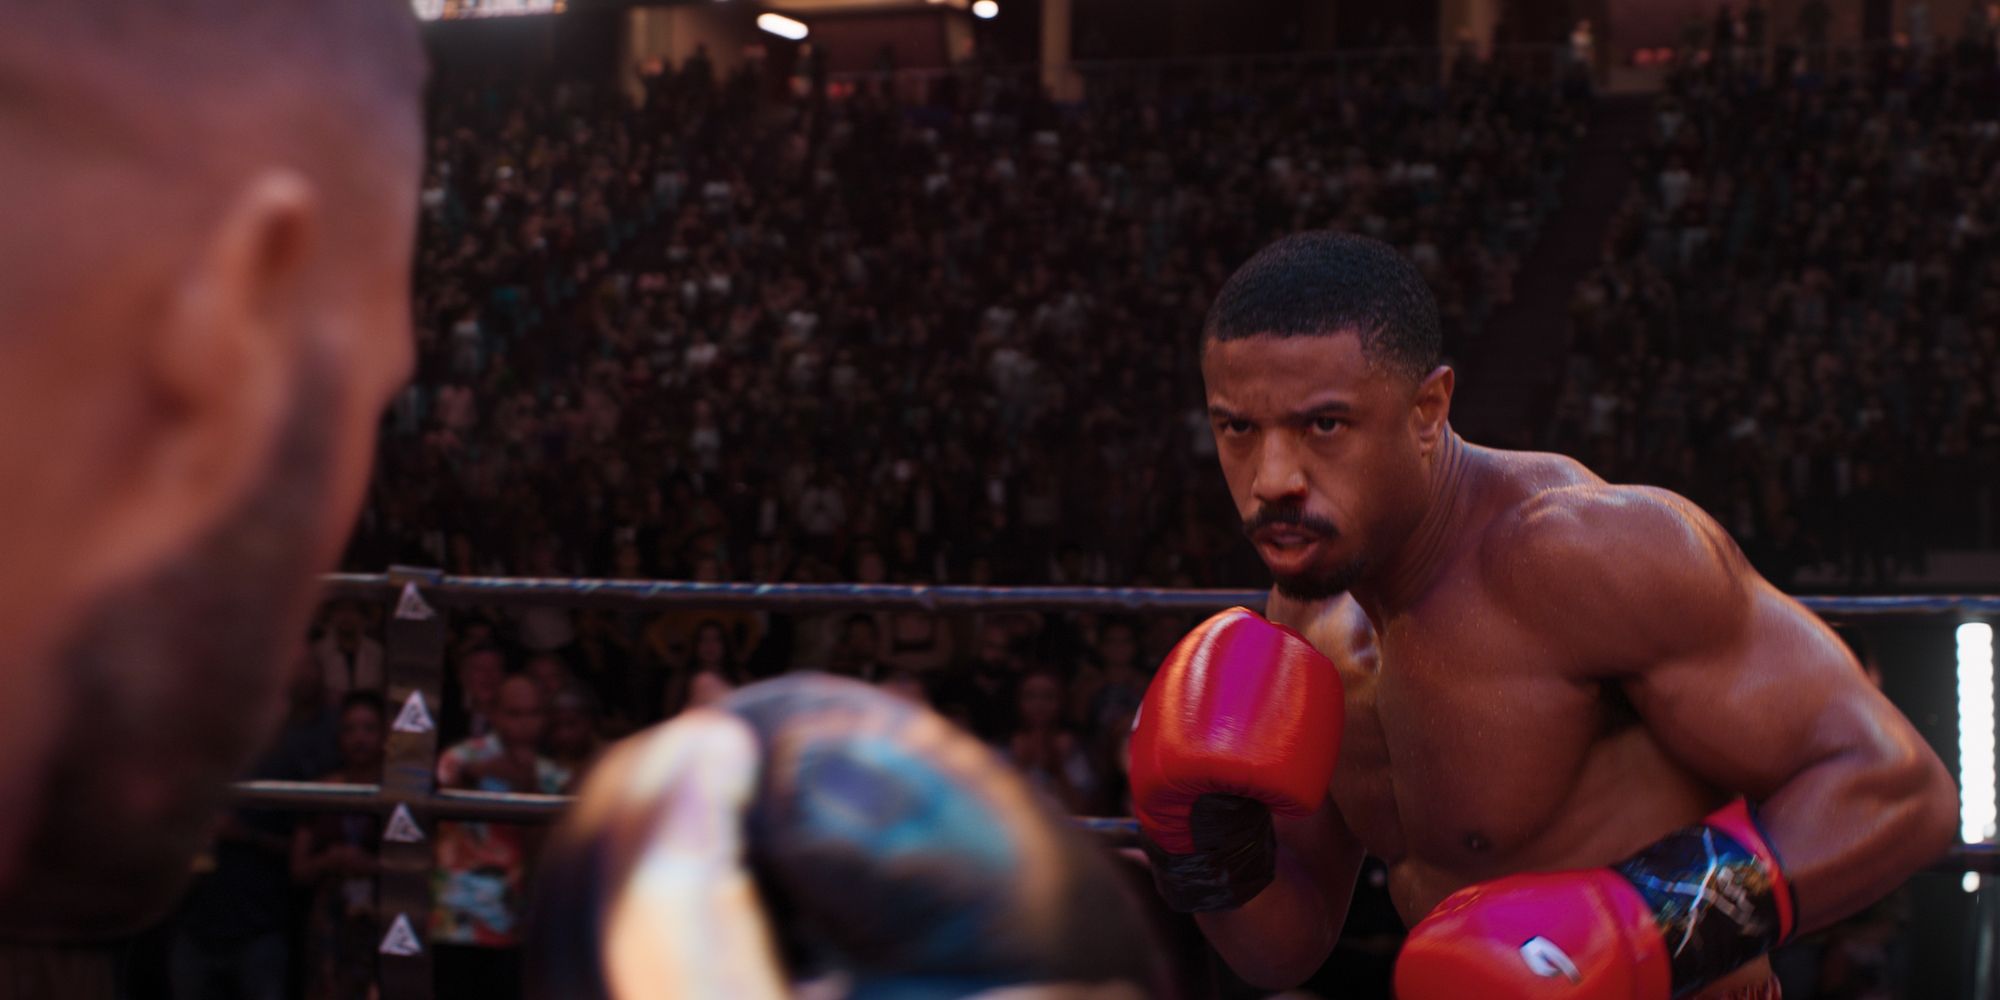 Adonis fights Dame in Creed 3